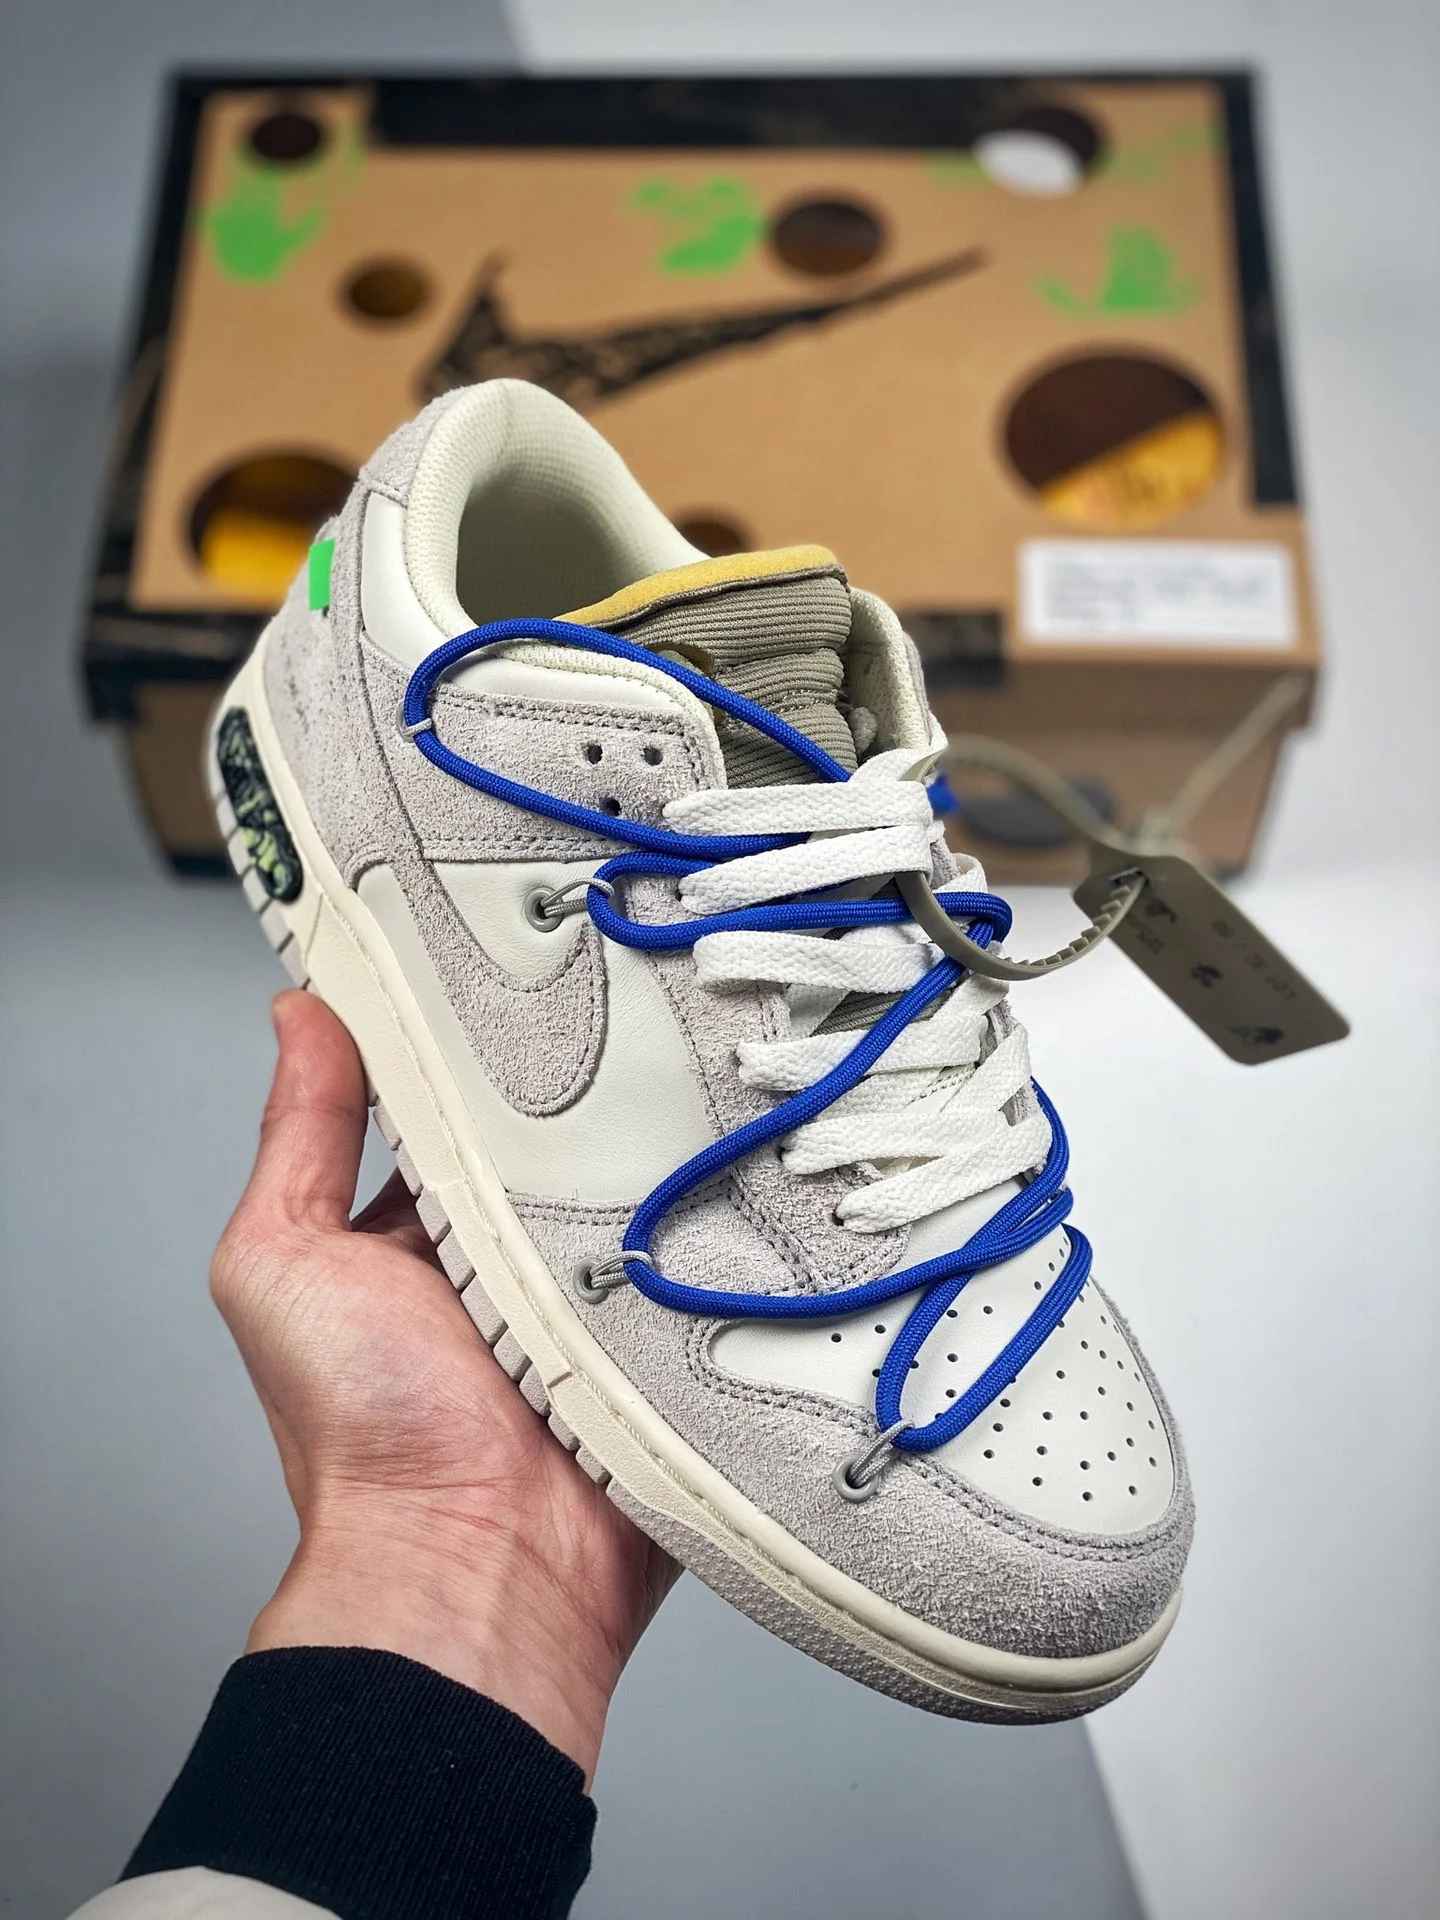 Off-White x Nike Dunk Low 32 of 50 Sail Neutral Grey Racer Blue For Sale